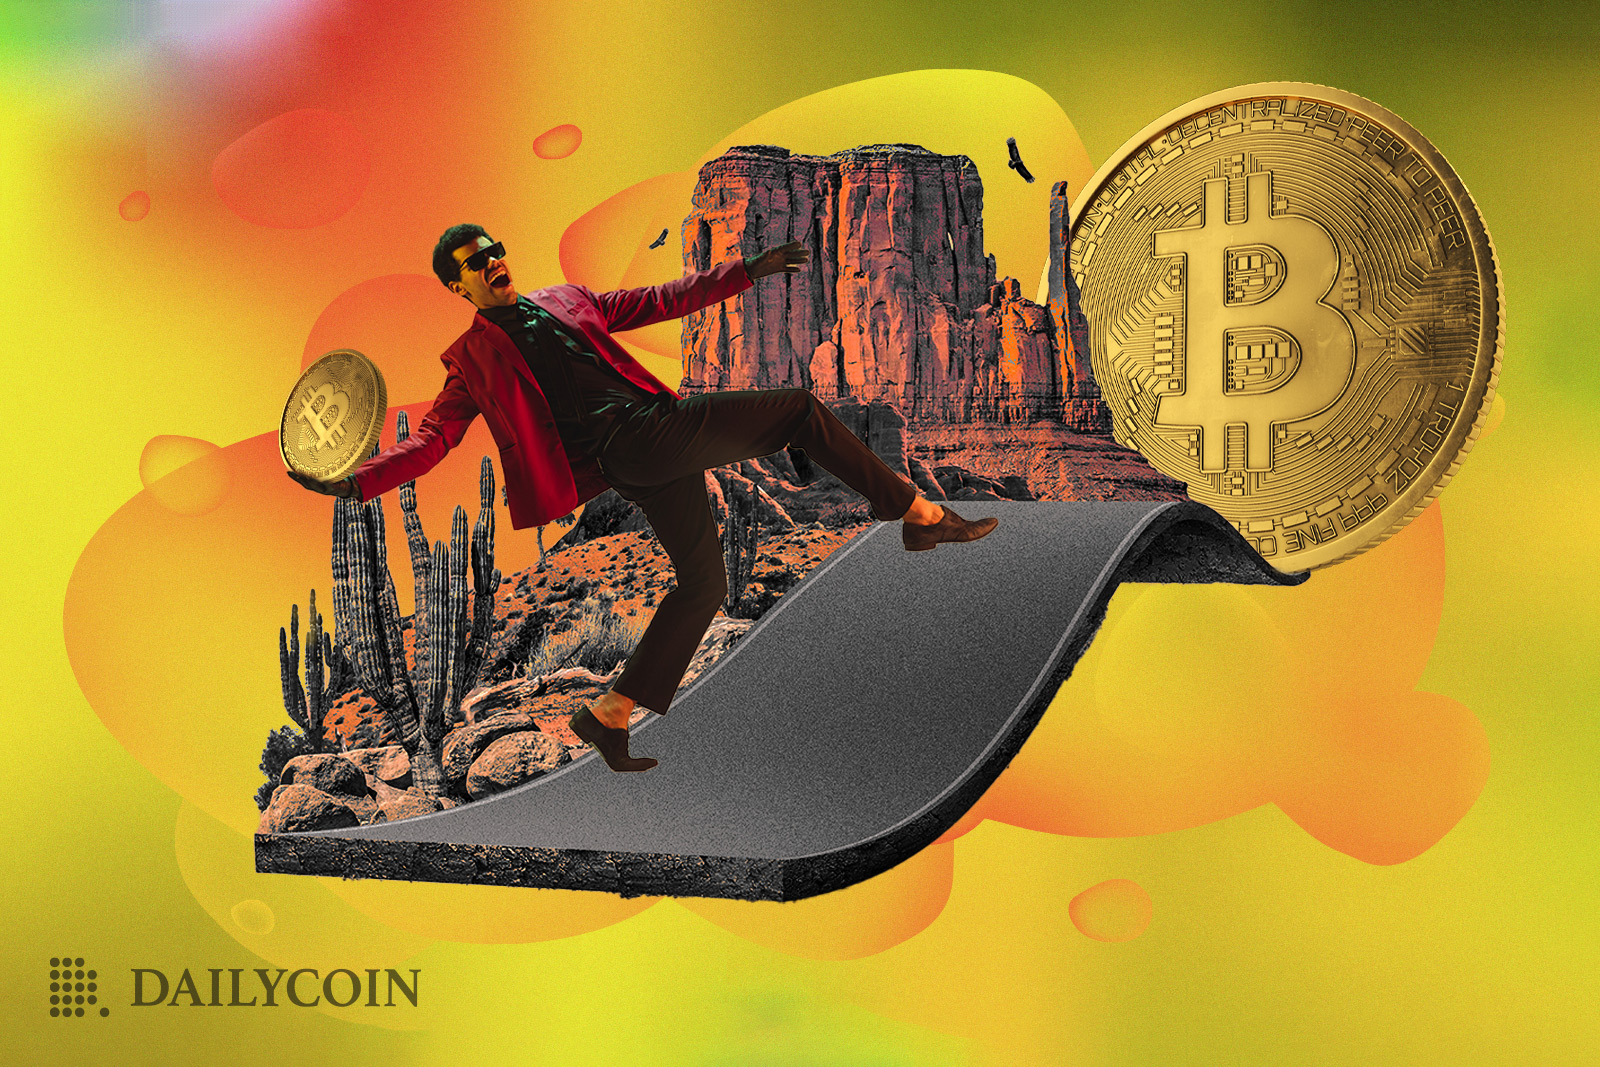 Man holding Bitcoin while walking cheerfully up a road toward a Bitcoin inside a desert landscape